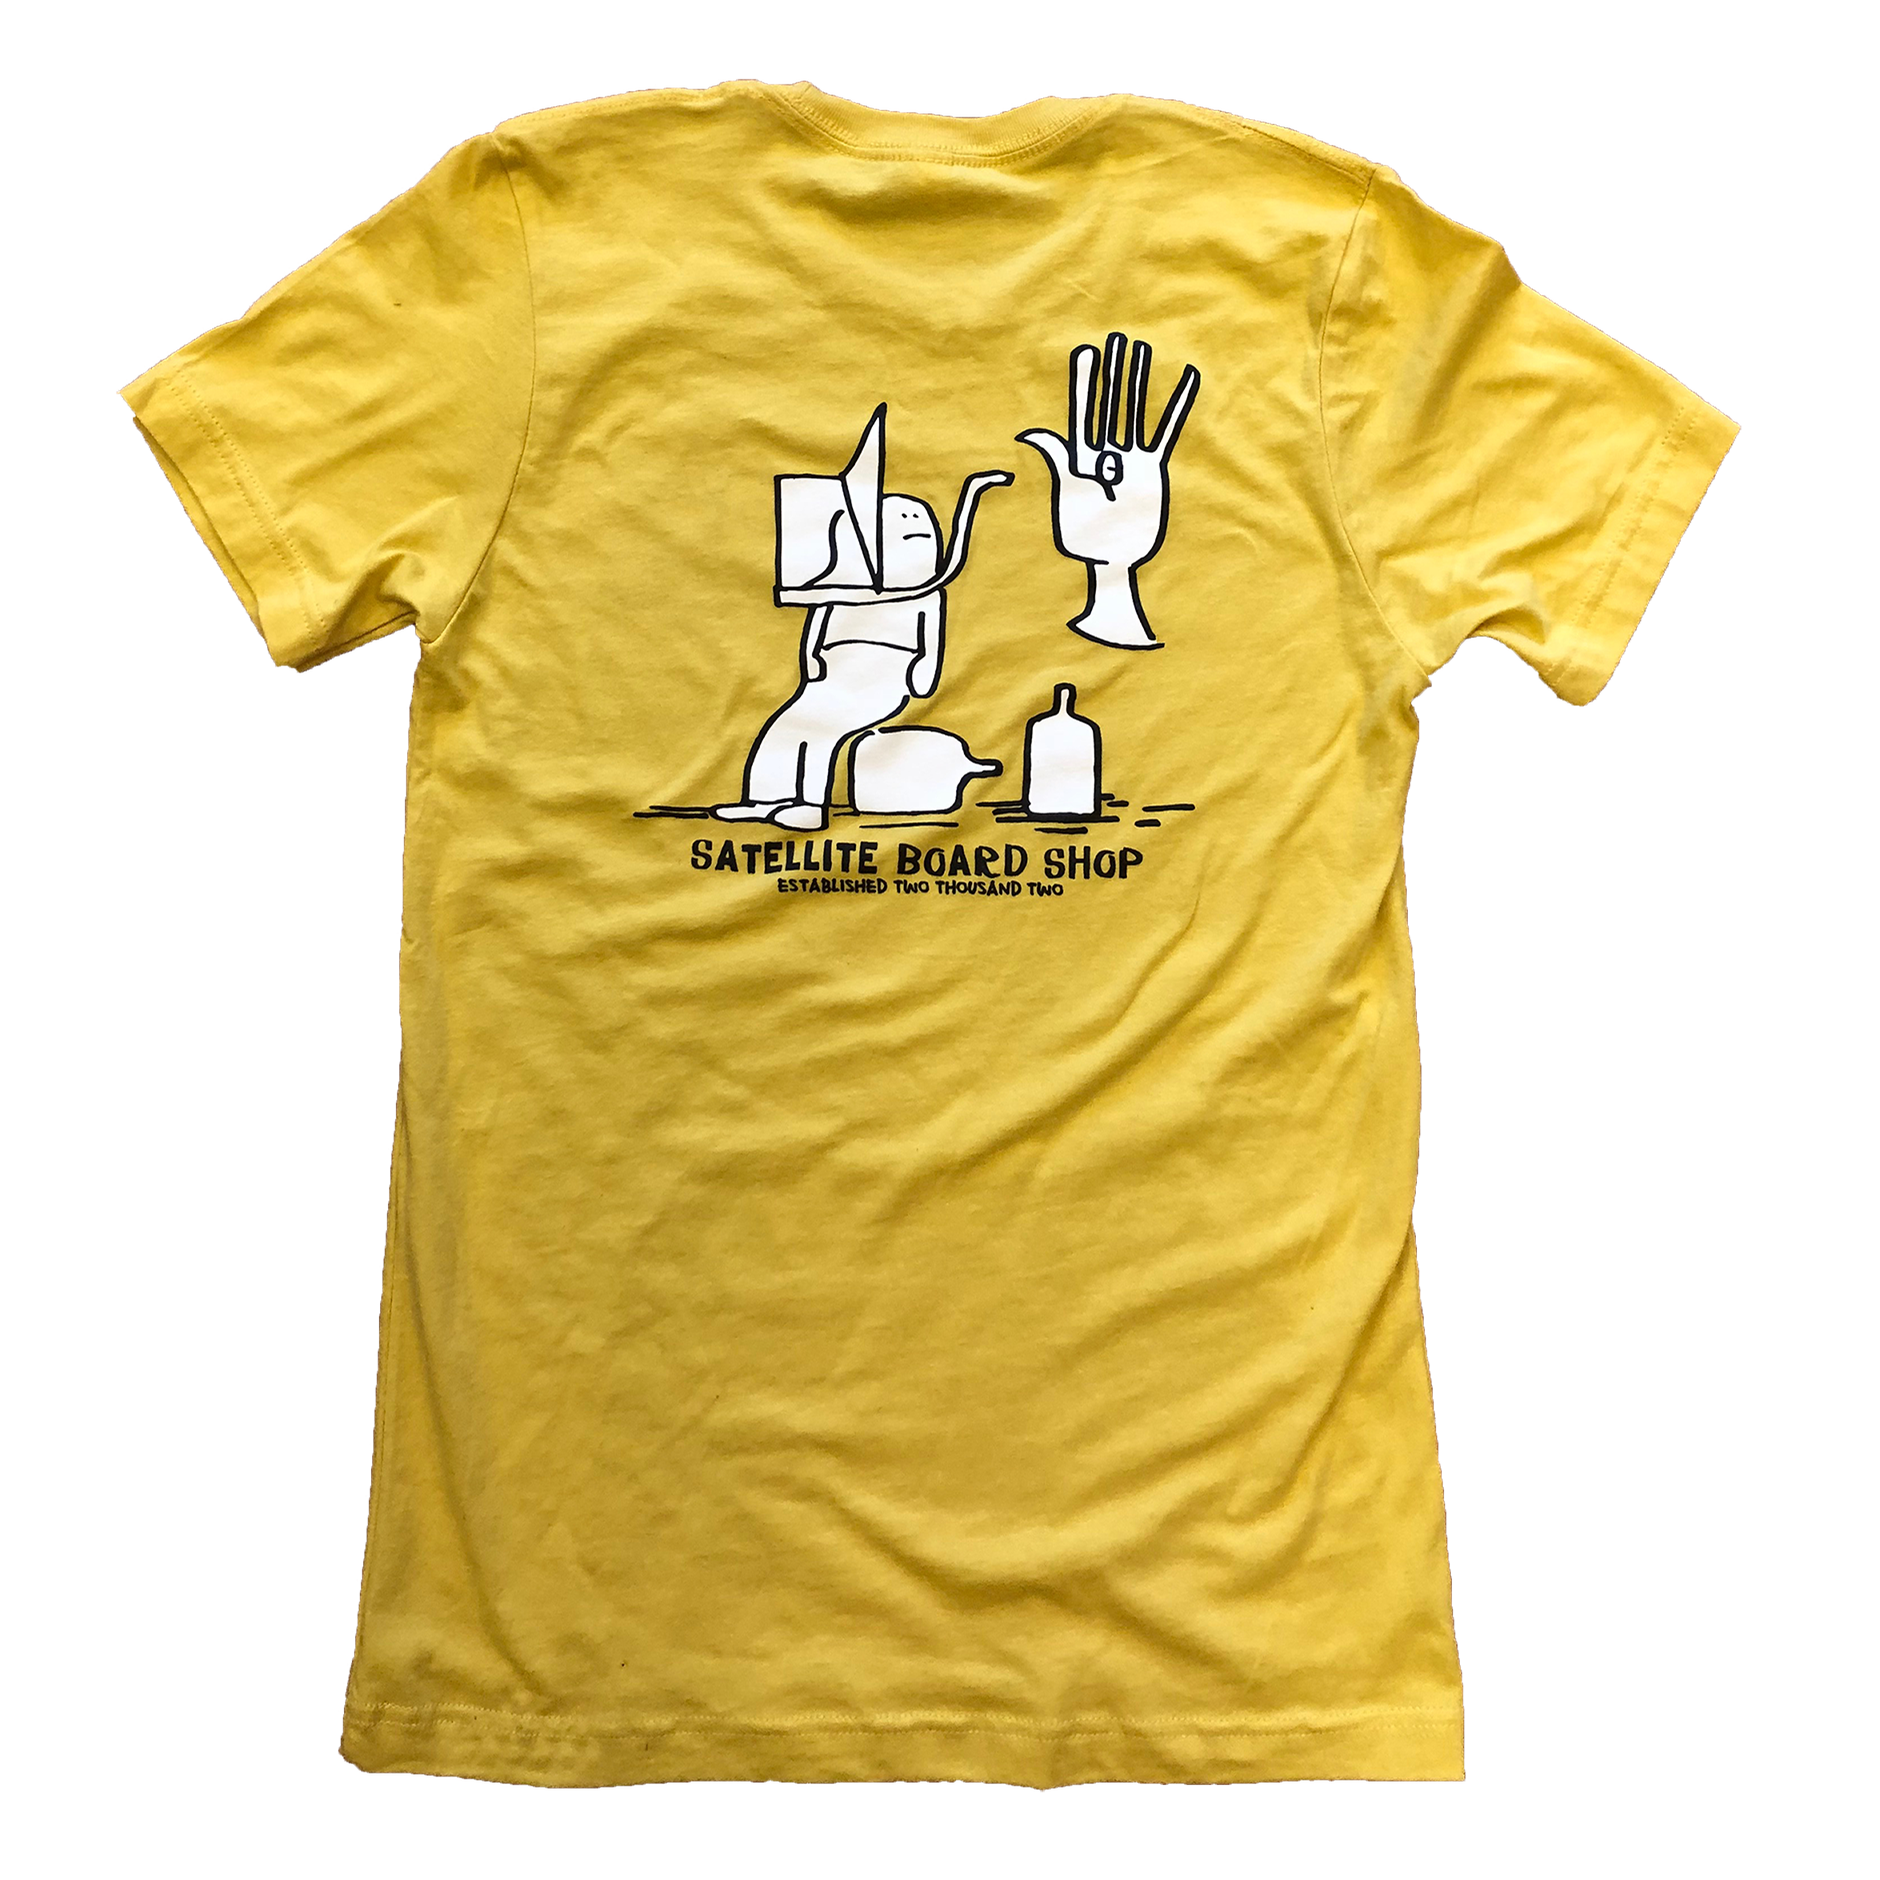 Satellite Gonz Sketchy Shop Tee (Maize Yellow)